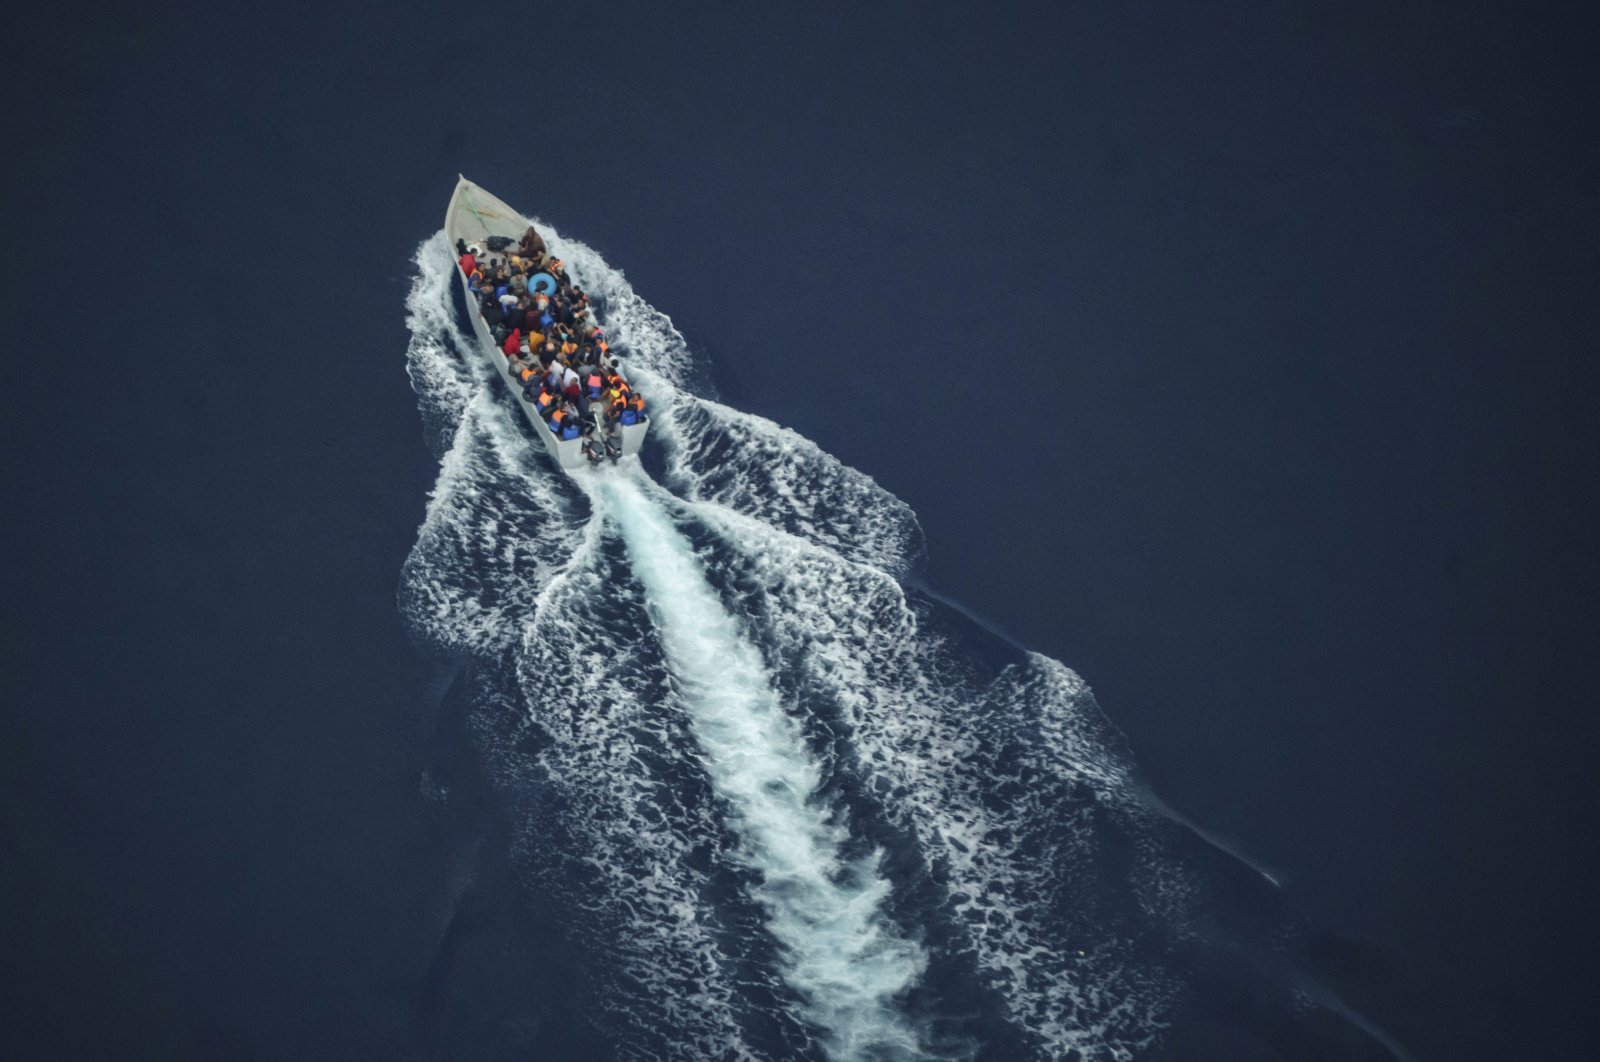 Migrants navigate on an overcrowded wooden boat in the Central Mediterranean Sea between North Africa and the Italian island of Lampedusa, Oct. 2, 2021. (AP Photo)